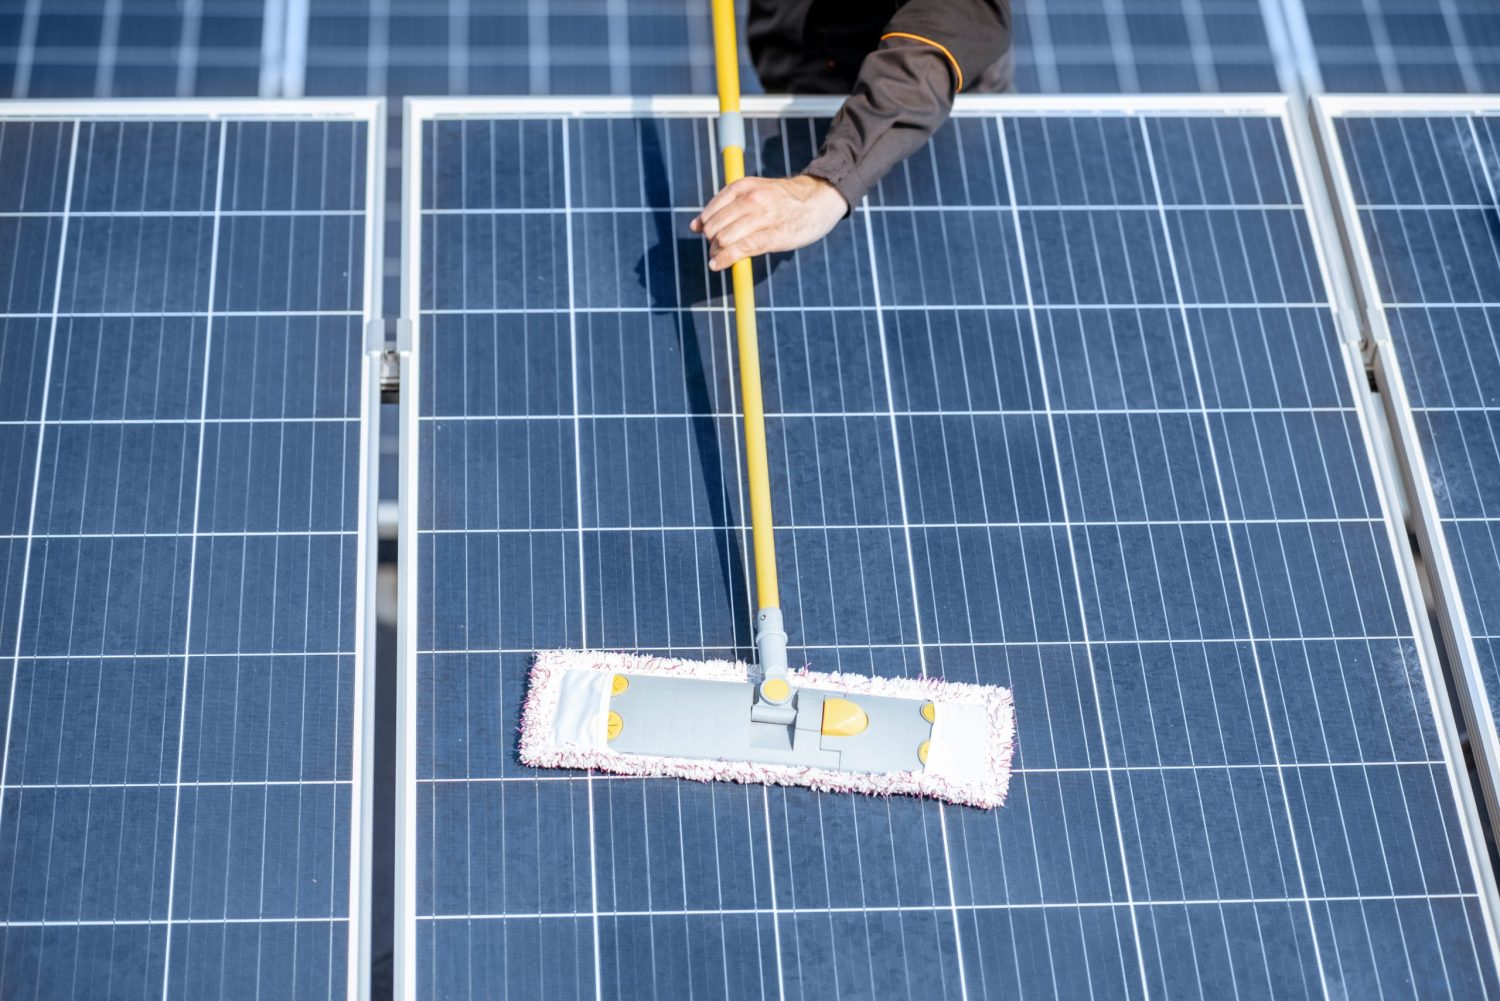 Maintenance of solar panels: ways to extend their service life